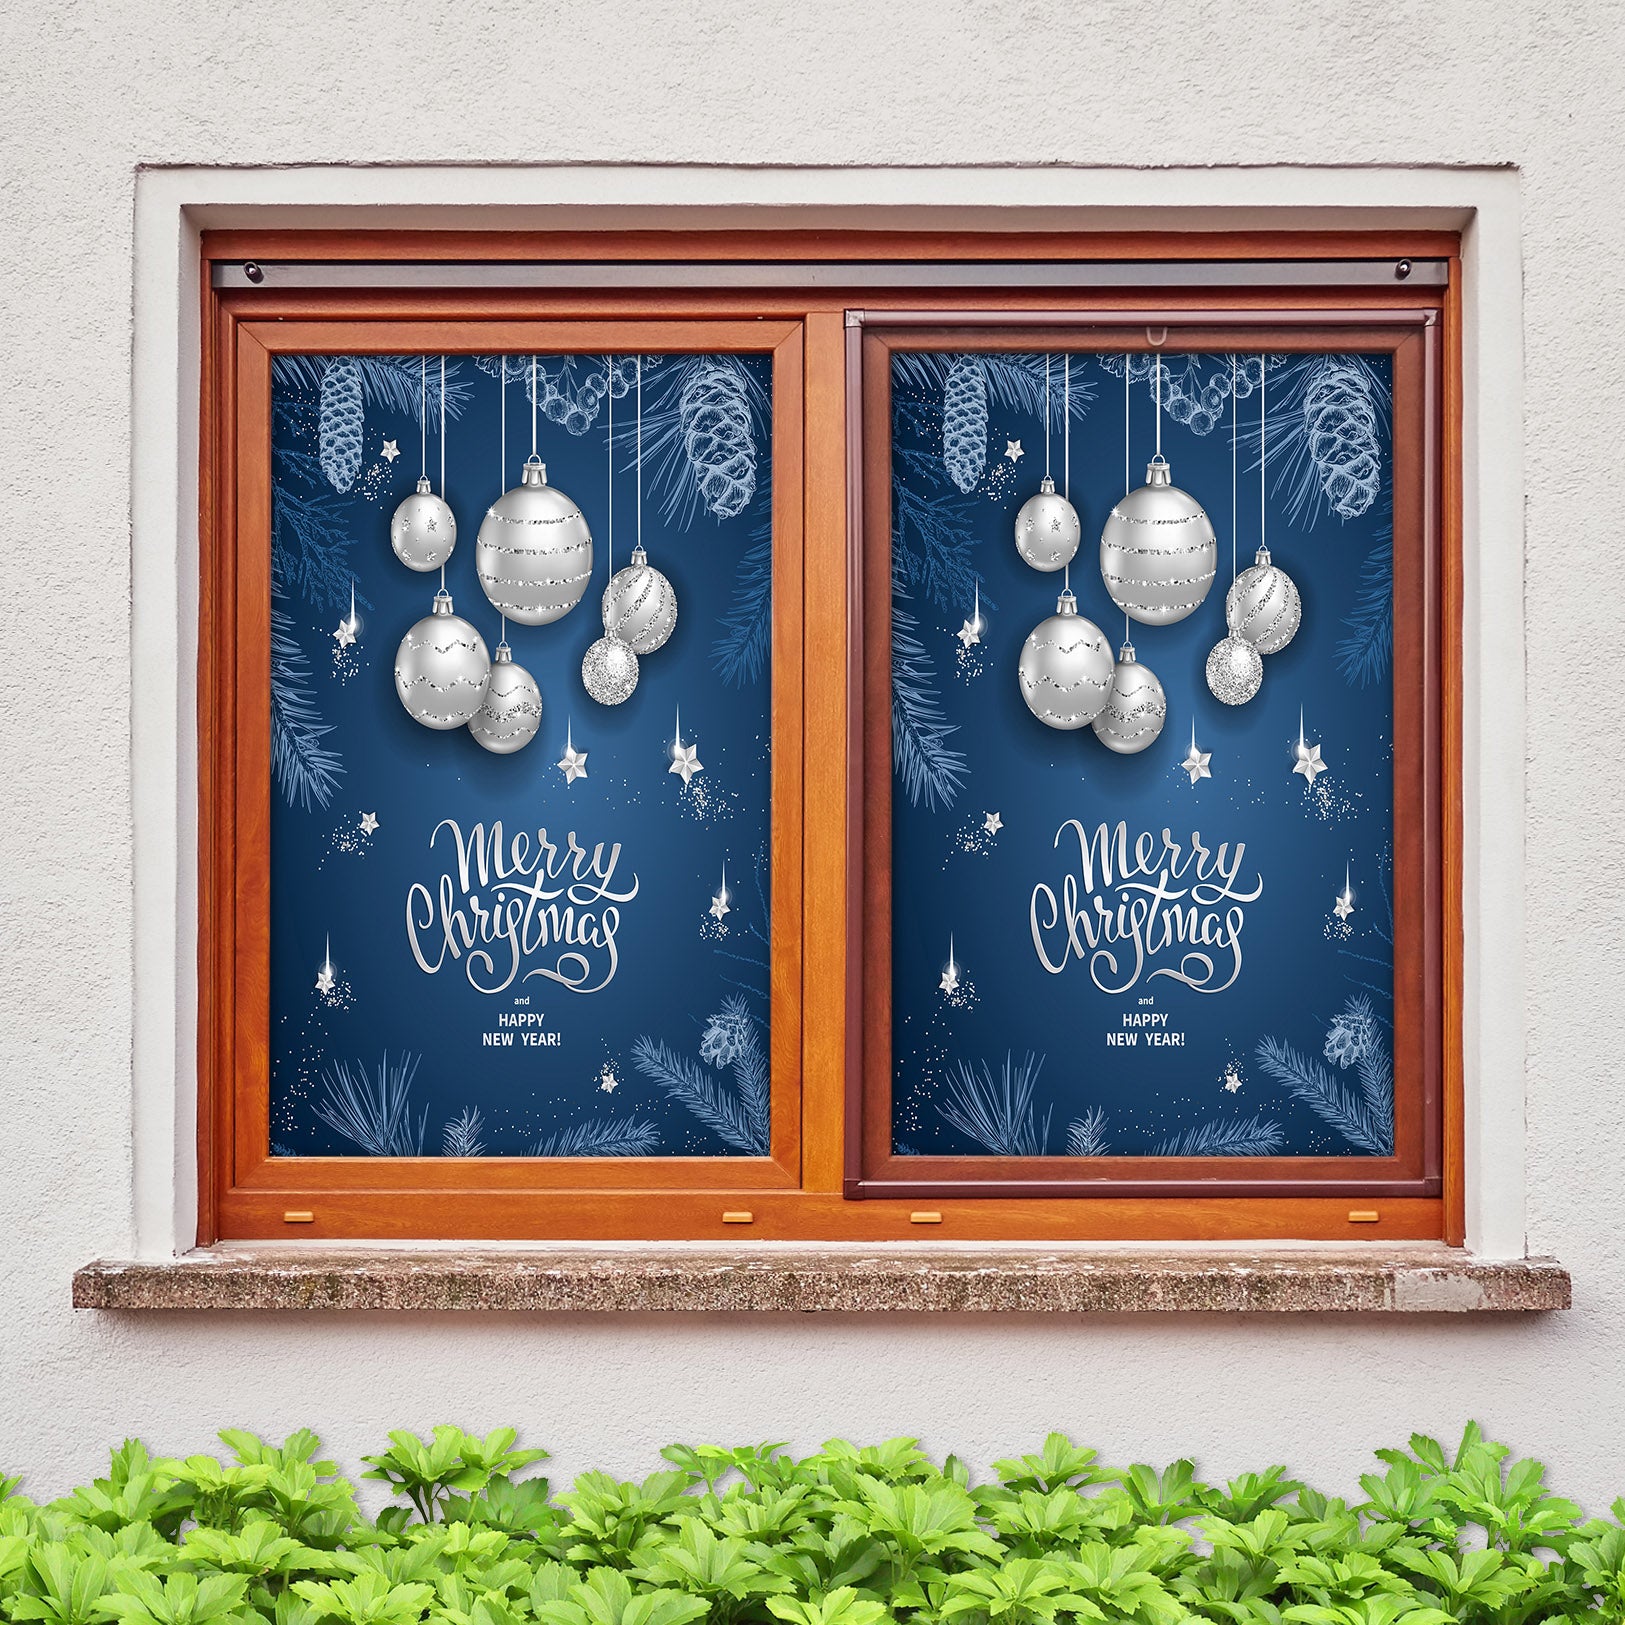 3D Merry Christmas 30070 Christmas Window Film Print Sticker Cling Stained Glass Xmas